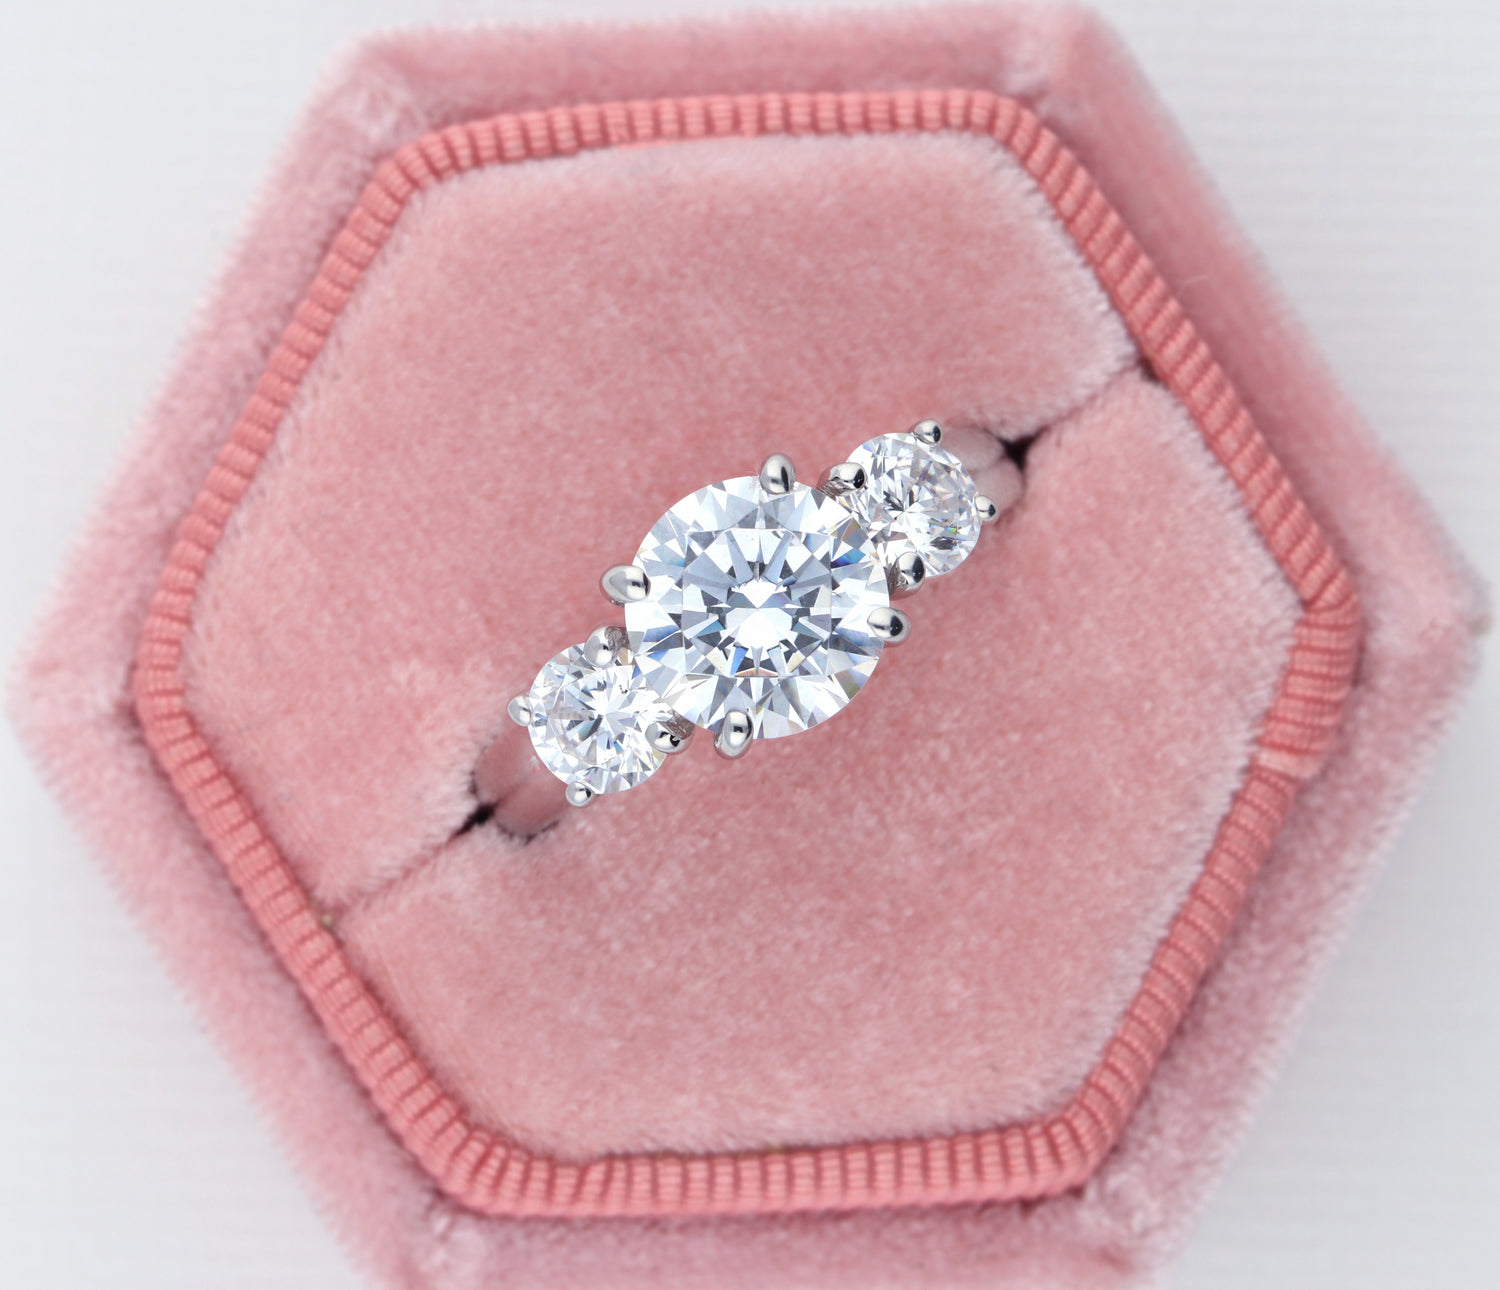 Top 5 Engagement Ring Cuts